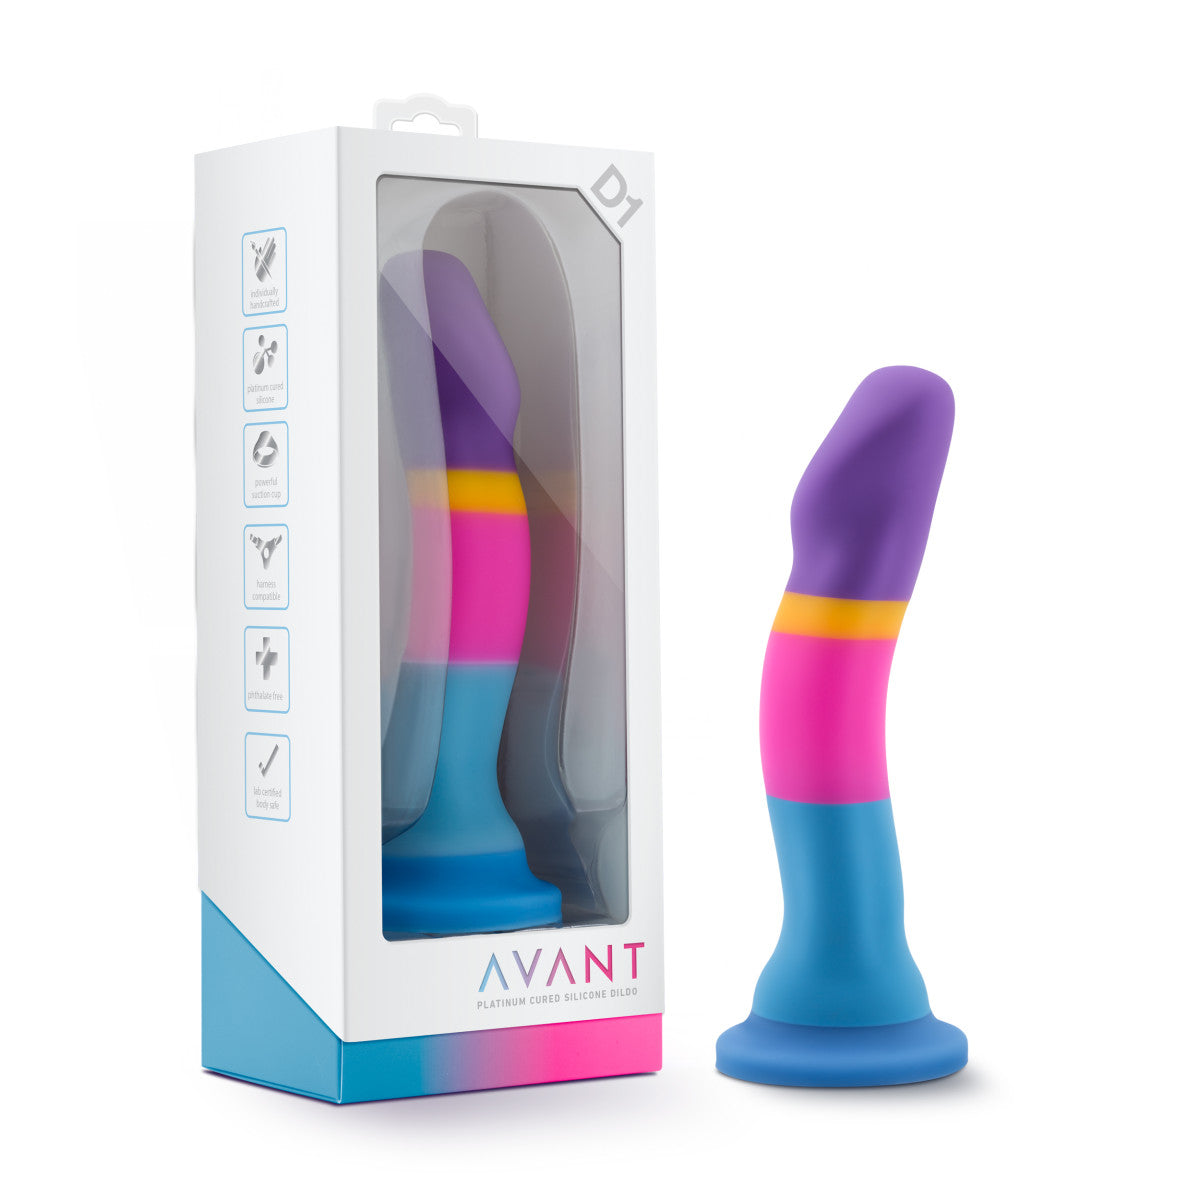 Blush Avant | Hot 'n' Cool D1: Artisan 7 Inch Curved G-Spot Dildo with Suction Cup Base - Elegantly Made with Smooth Ultrasilk® Purio™ Silicone